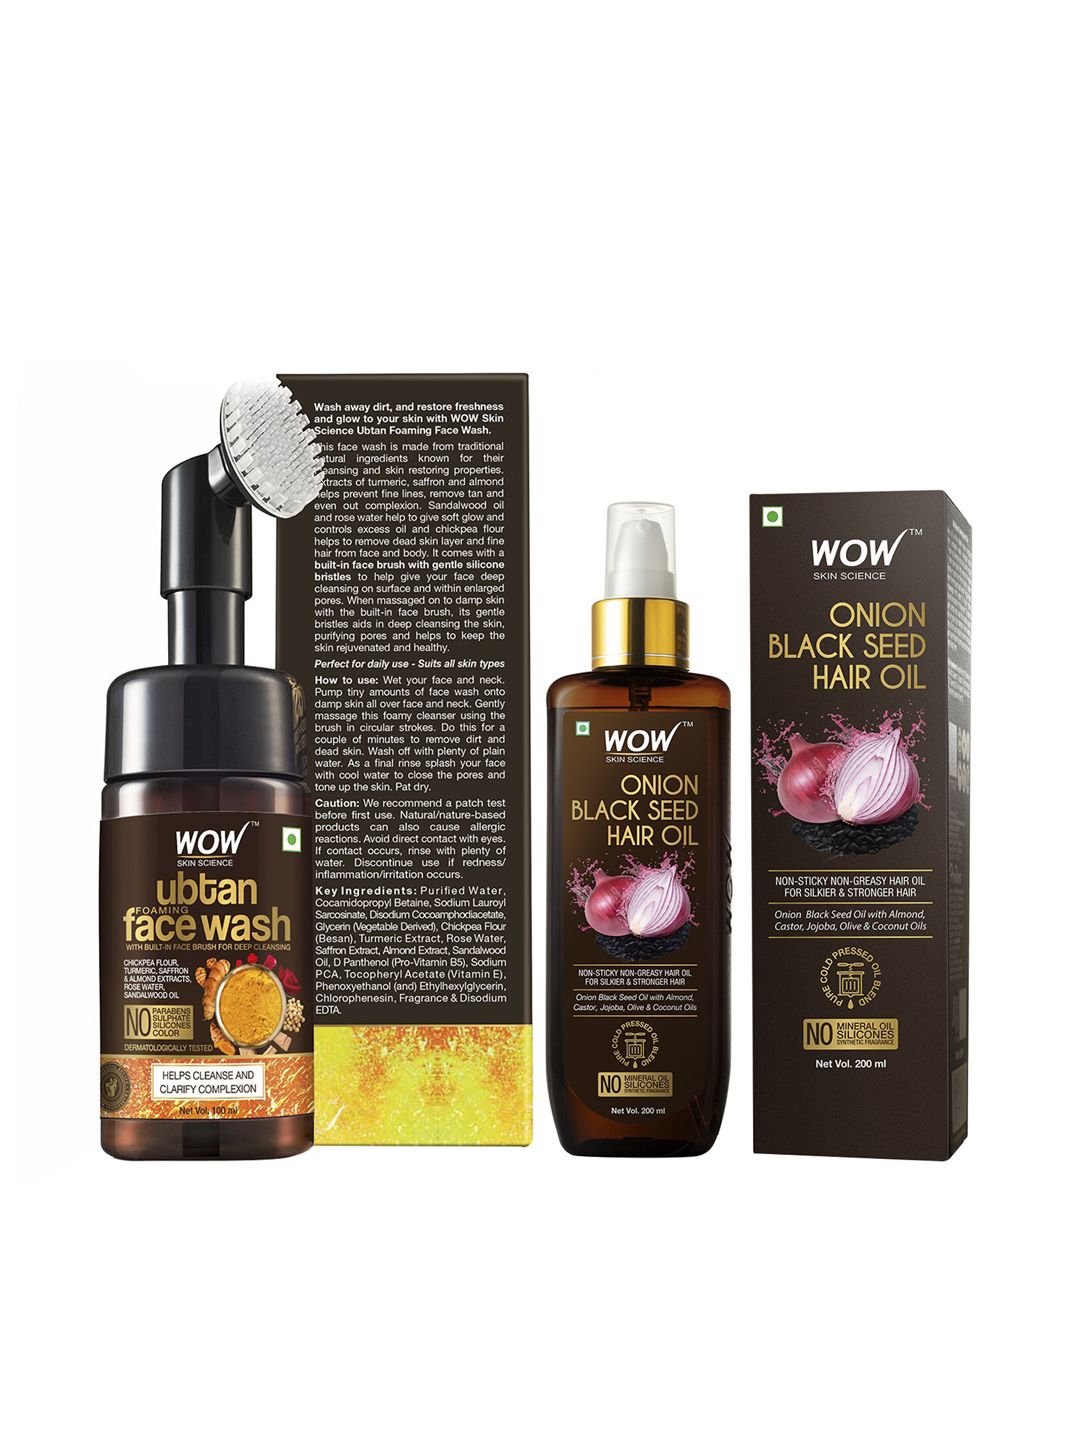 WOW SKIN SCIENCE Set of Onion Black Seed Hair Oil & Ubtan Foaming Face Wash Price in India